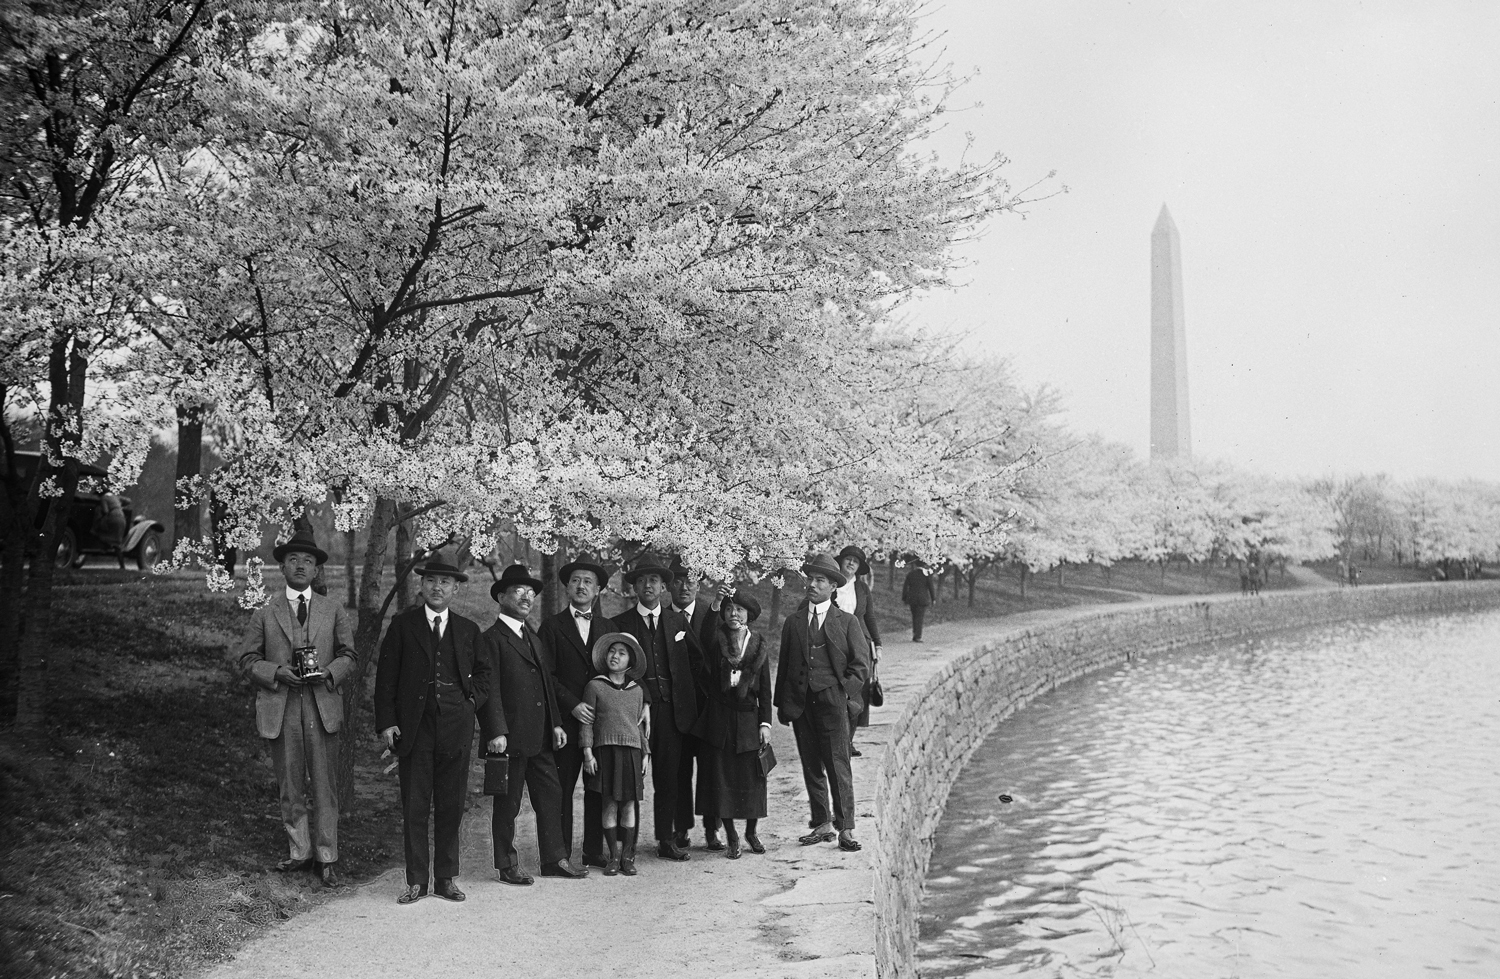 A group of men, women, and one child in 1920s clothing stand under cherry blossoms with the Washington Monument in the background.